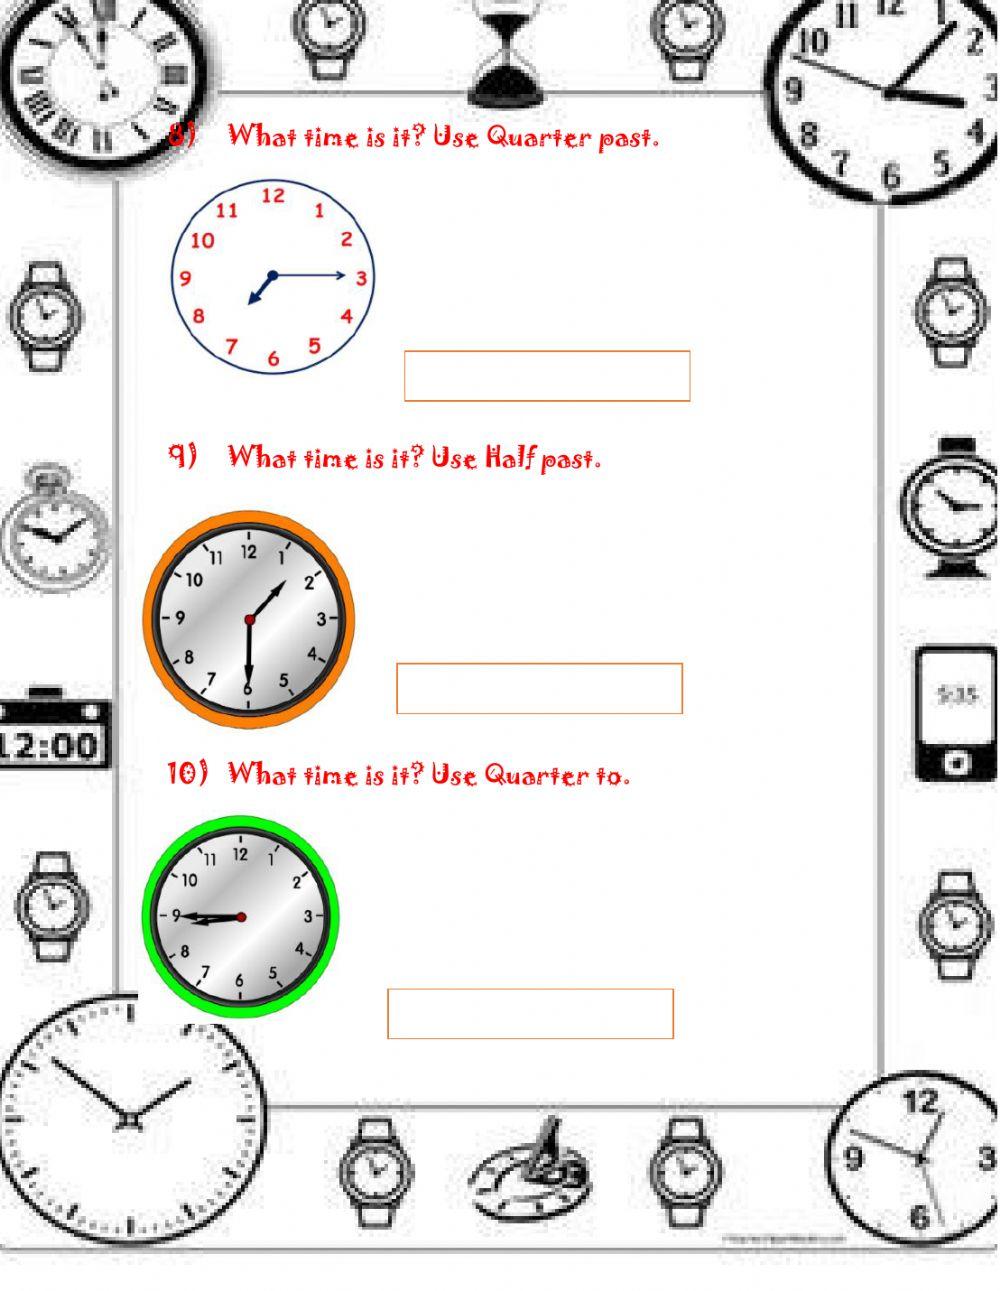 Telling the time Quiz